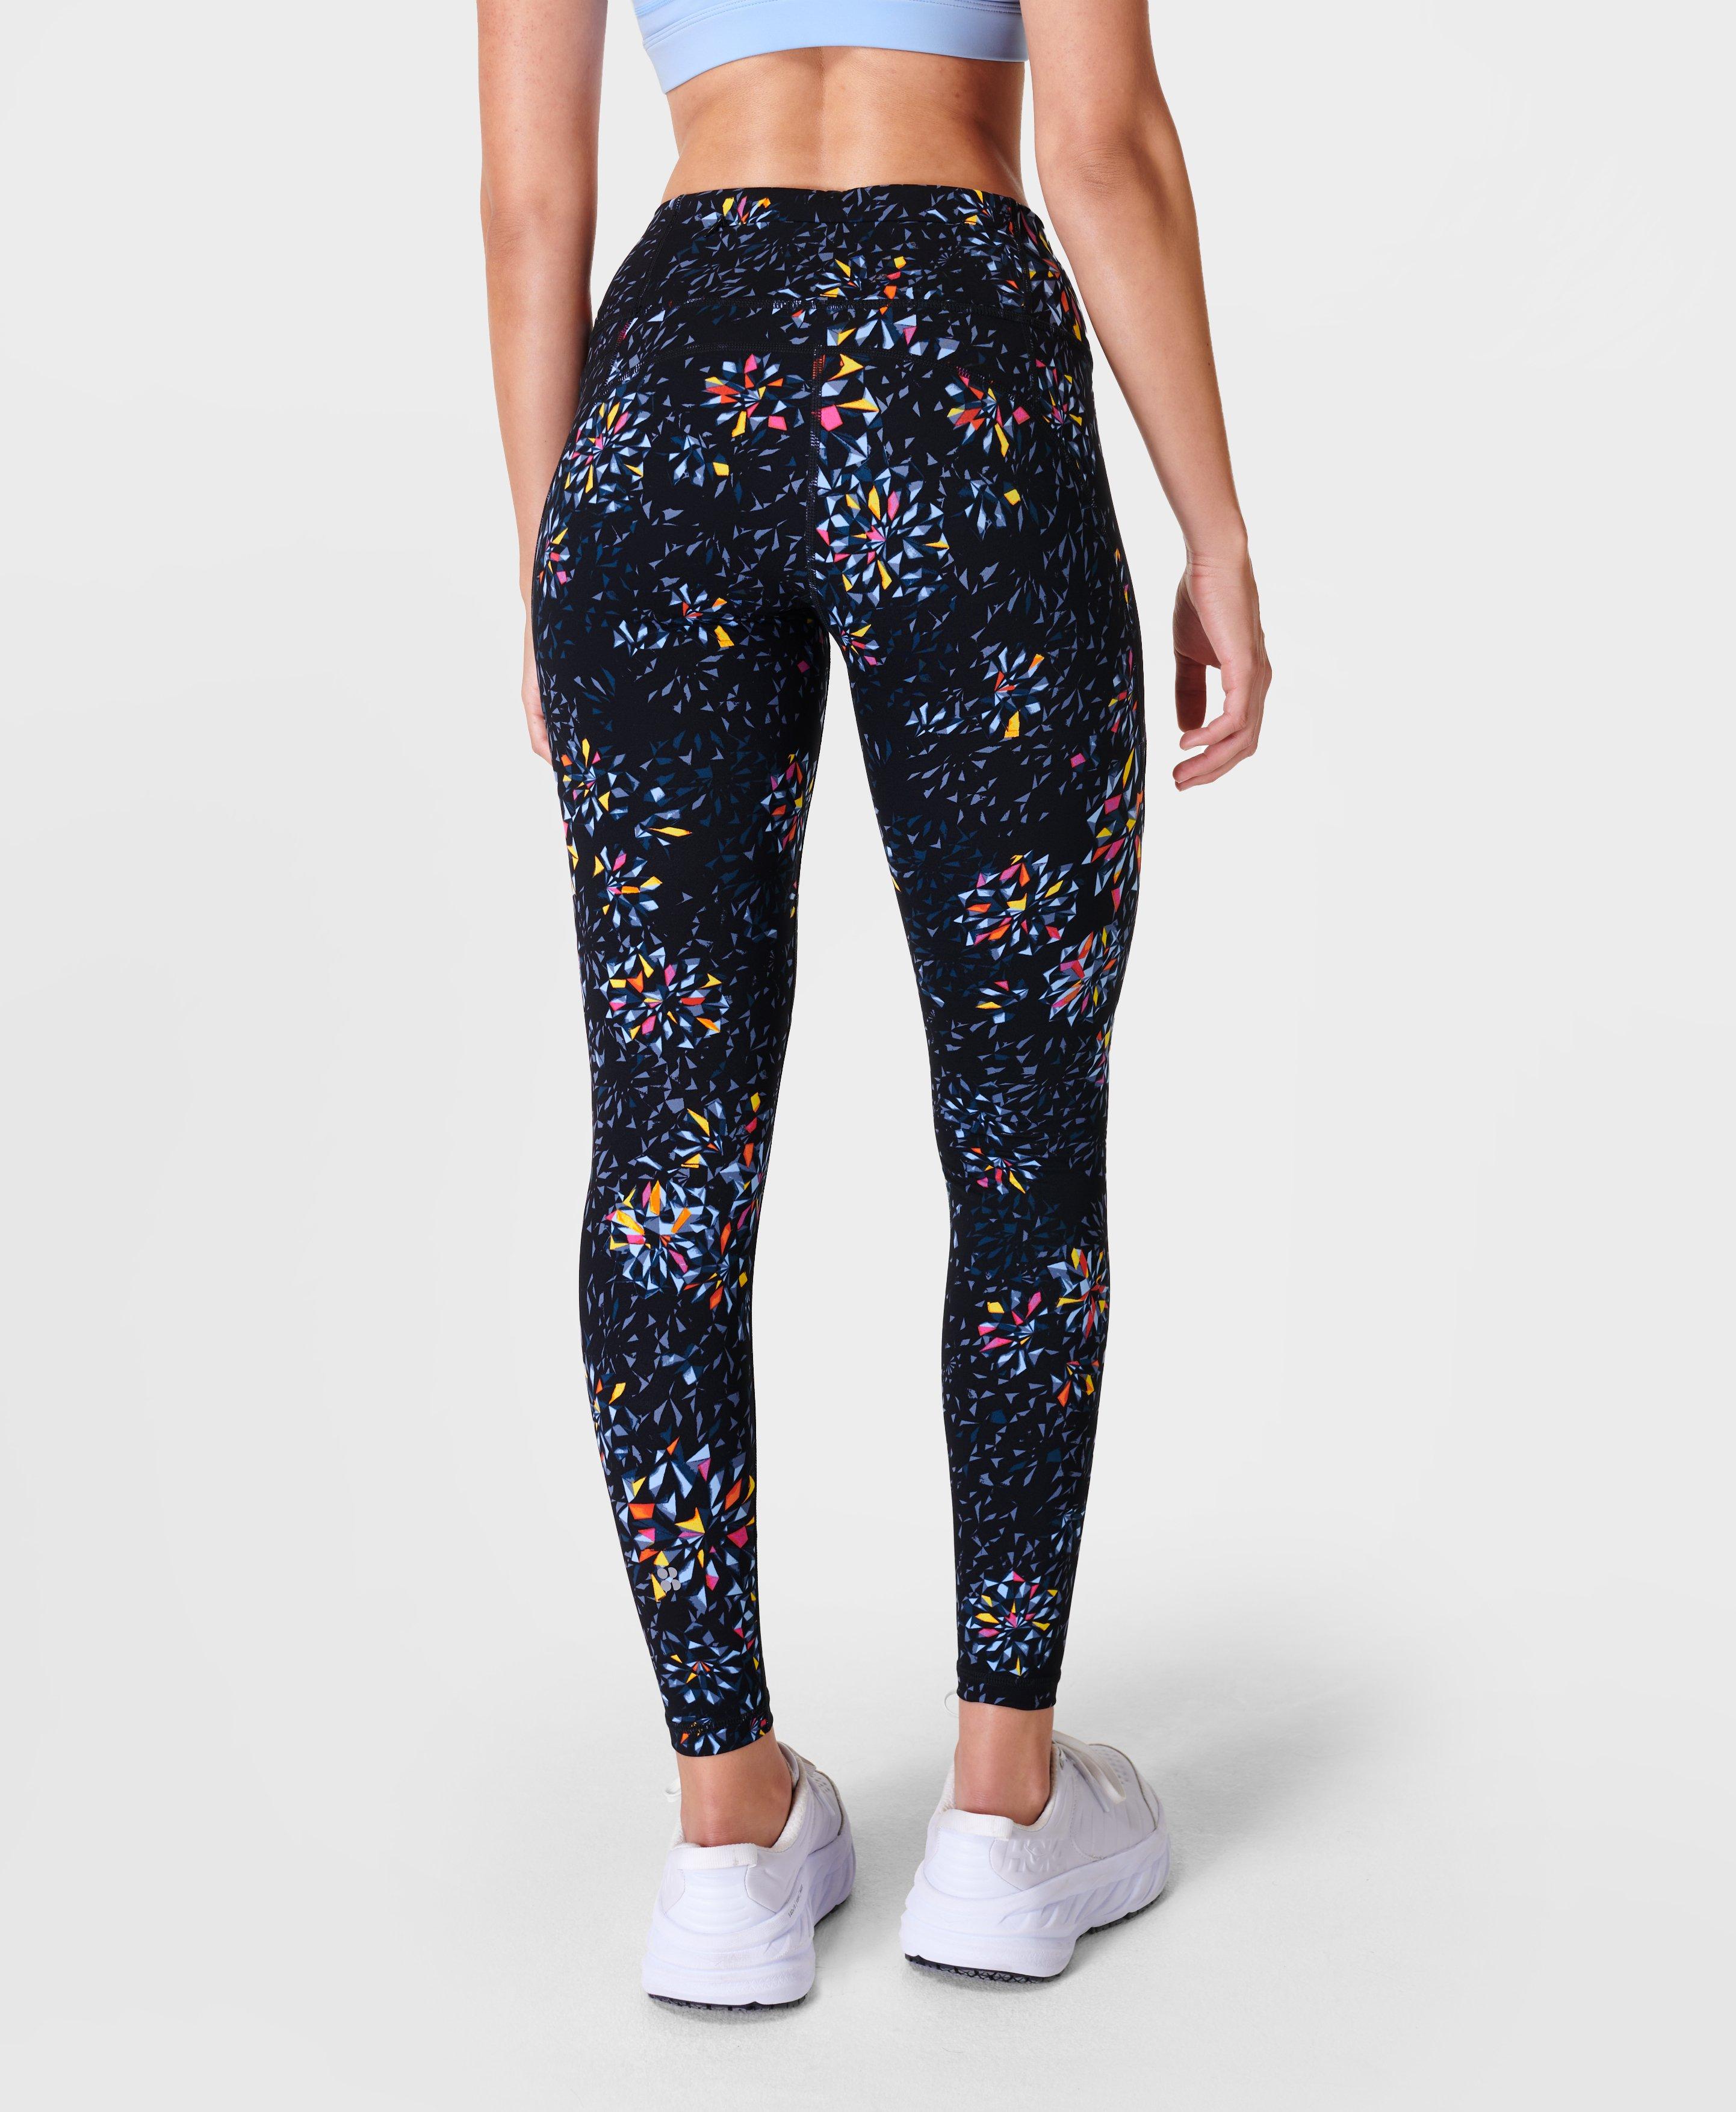 Kandy Floral Activewear – DivineStyles